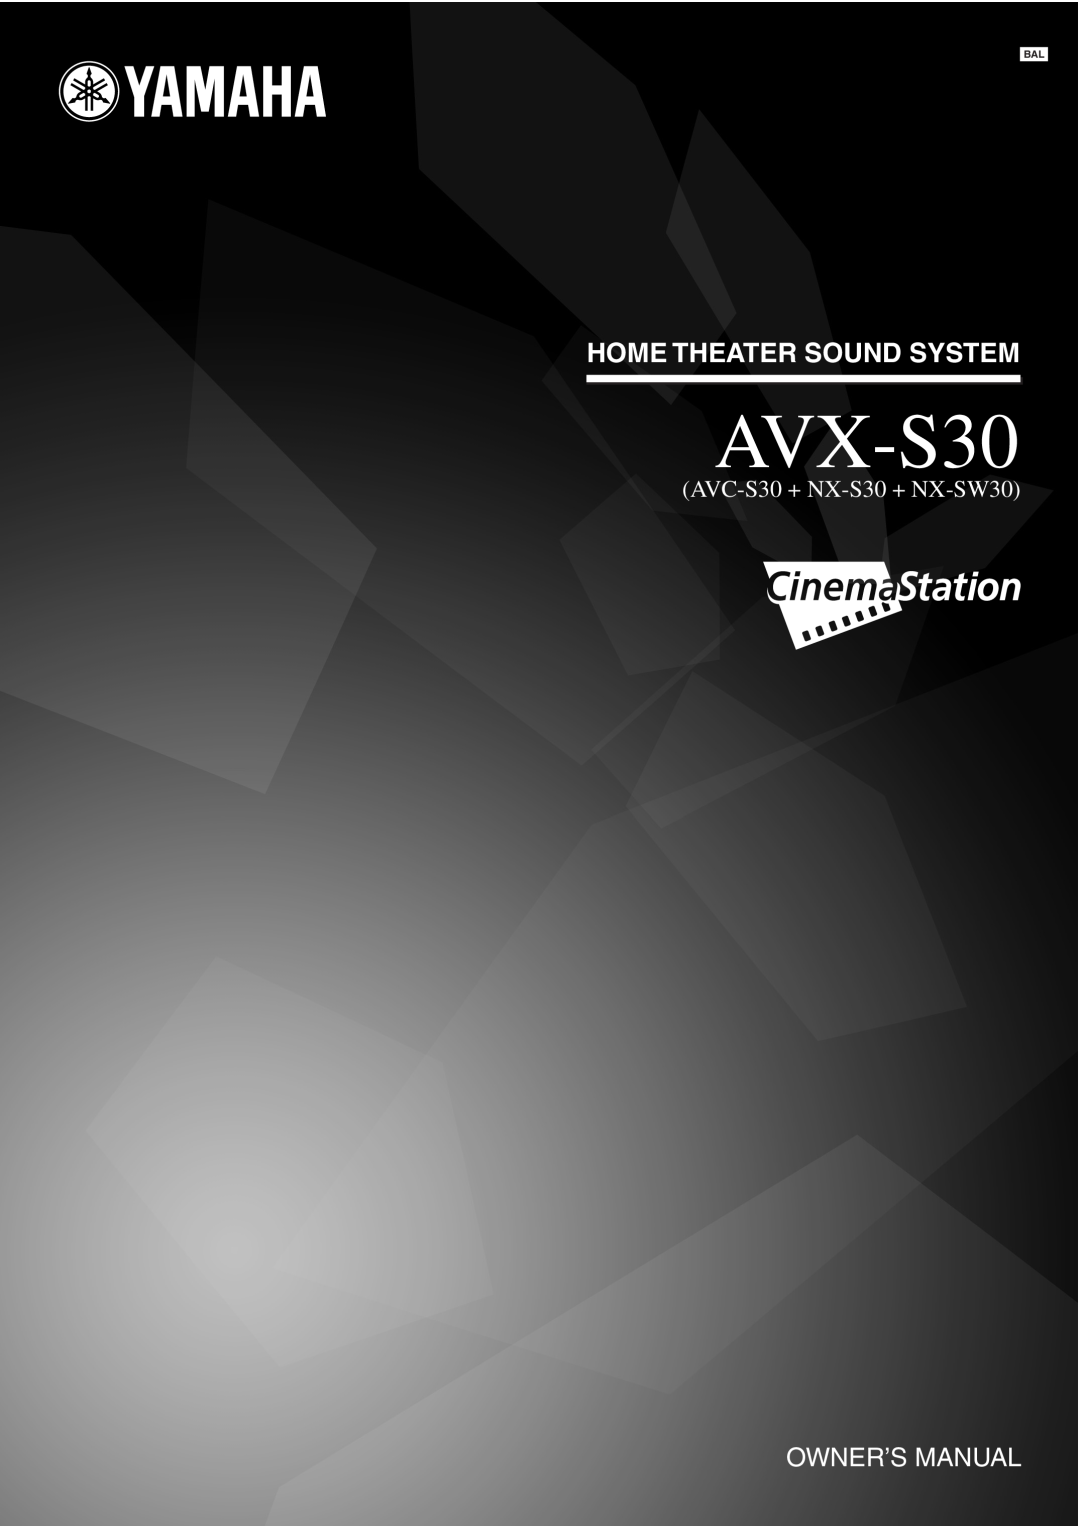 Yamaha AVX-S30 owner manual Home Theater Sound System, Owner’S Manual, AVC-S30+ NX-S30+ NX-SW30 